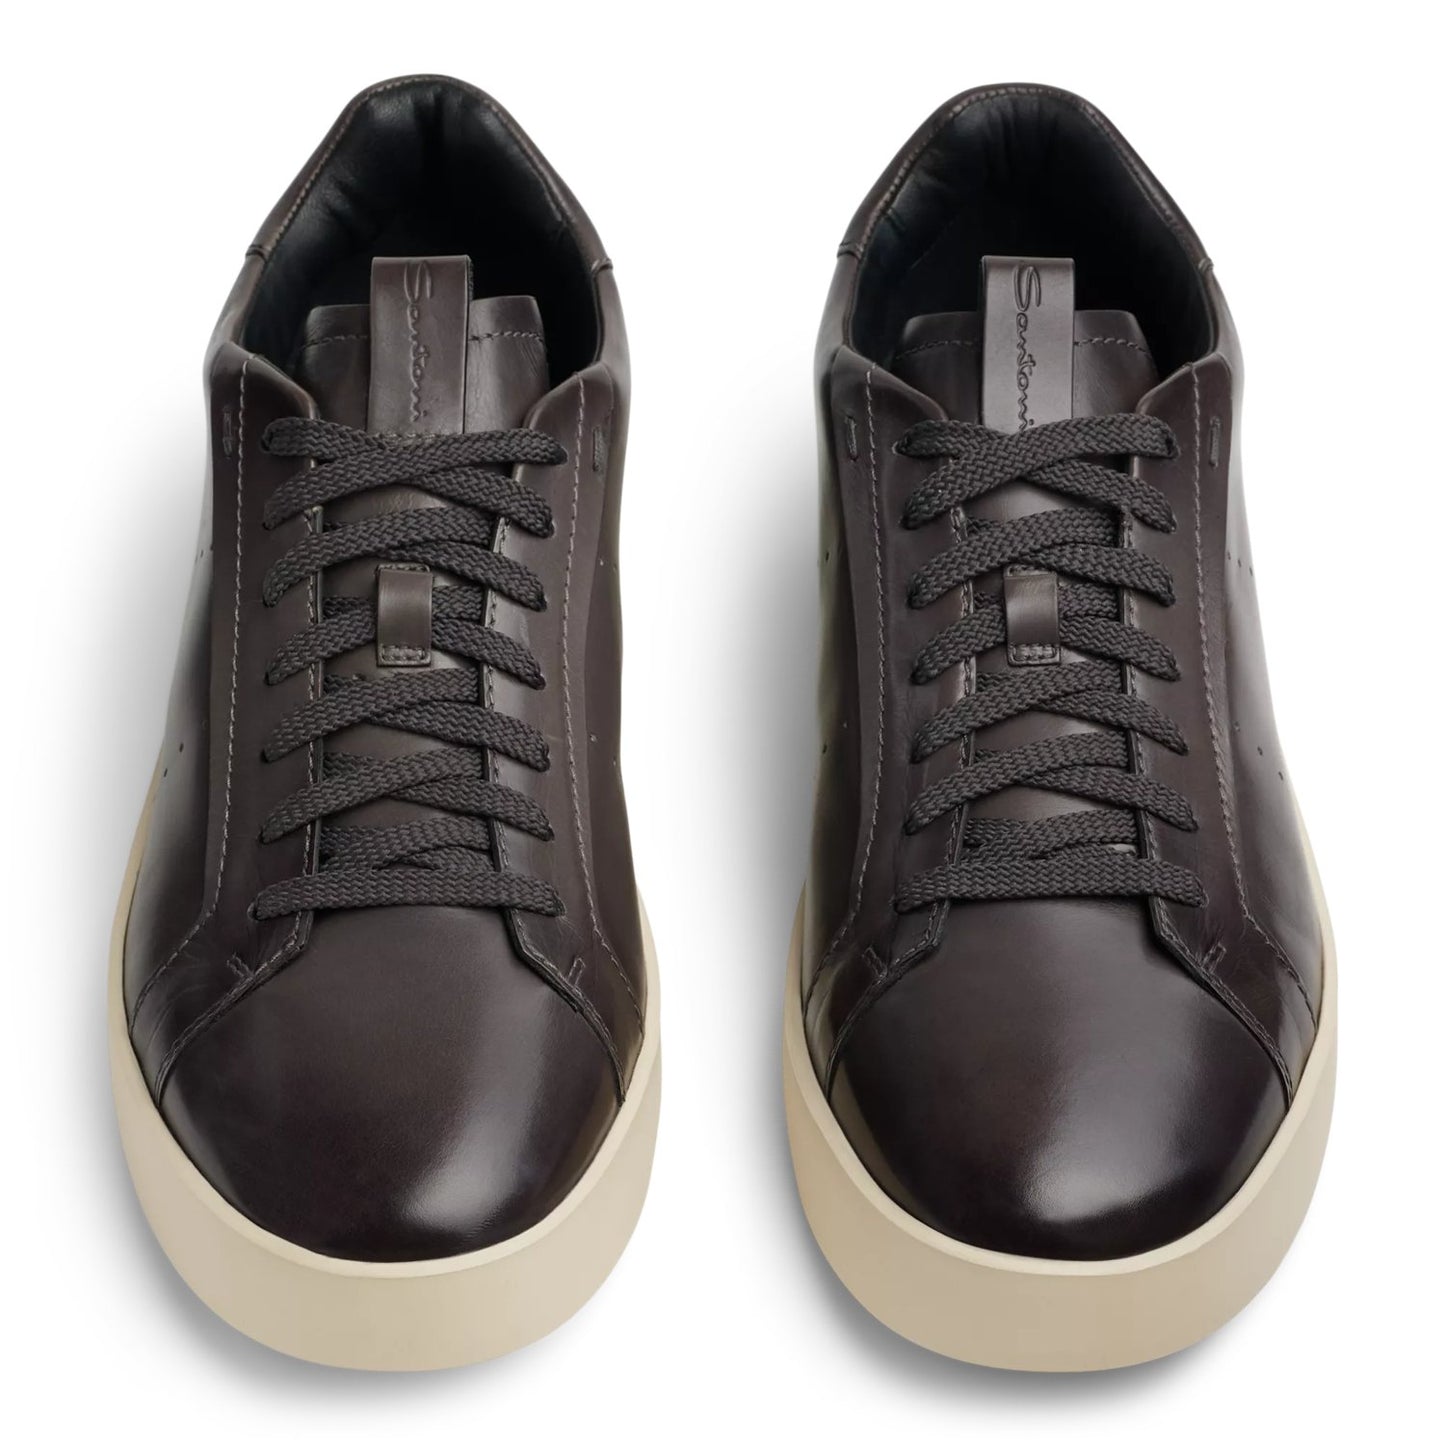 Declaims Leather Lace Up Sneakers